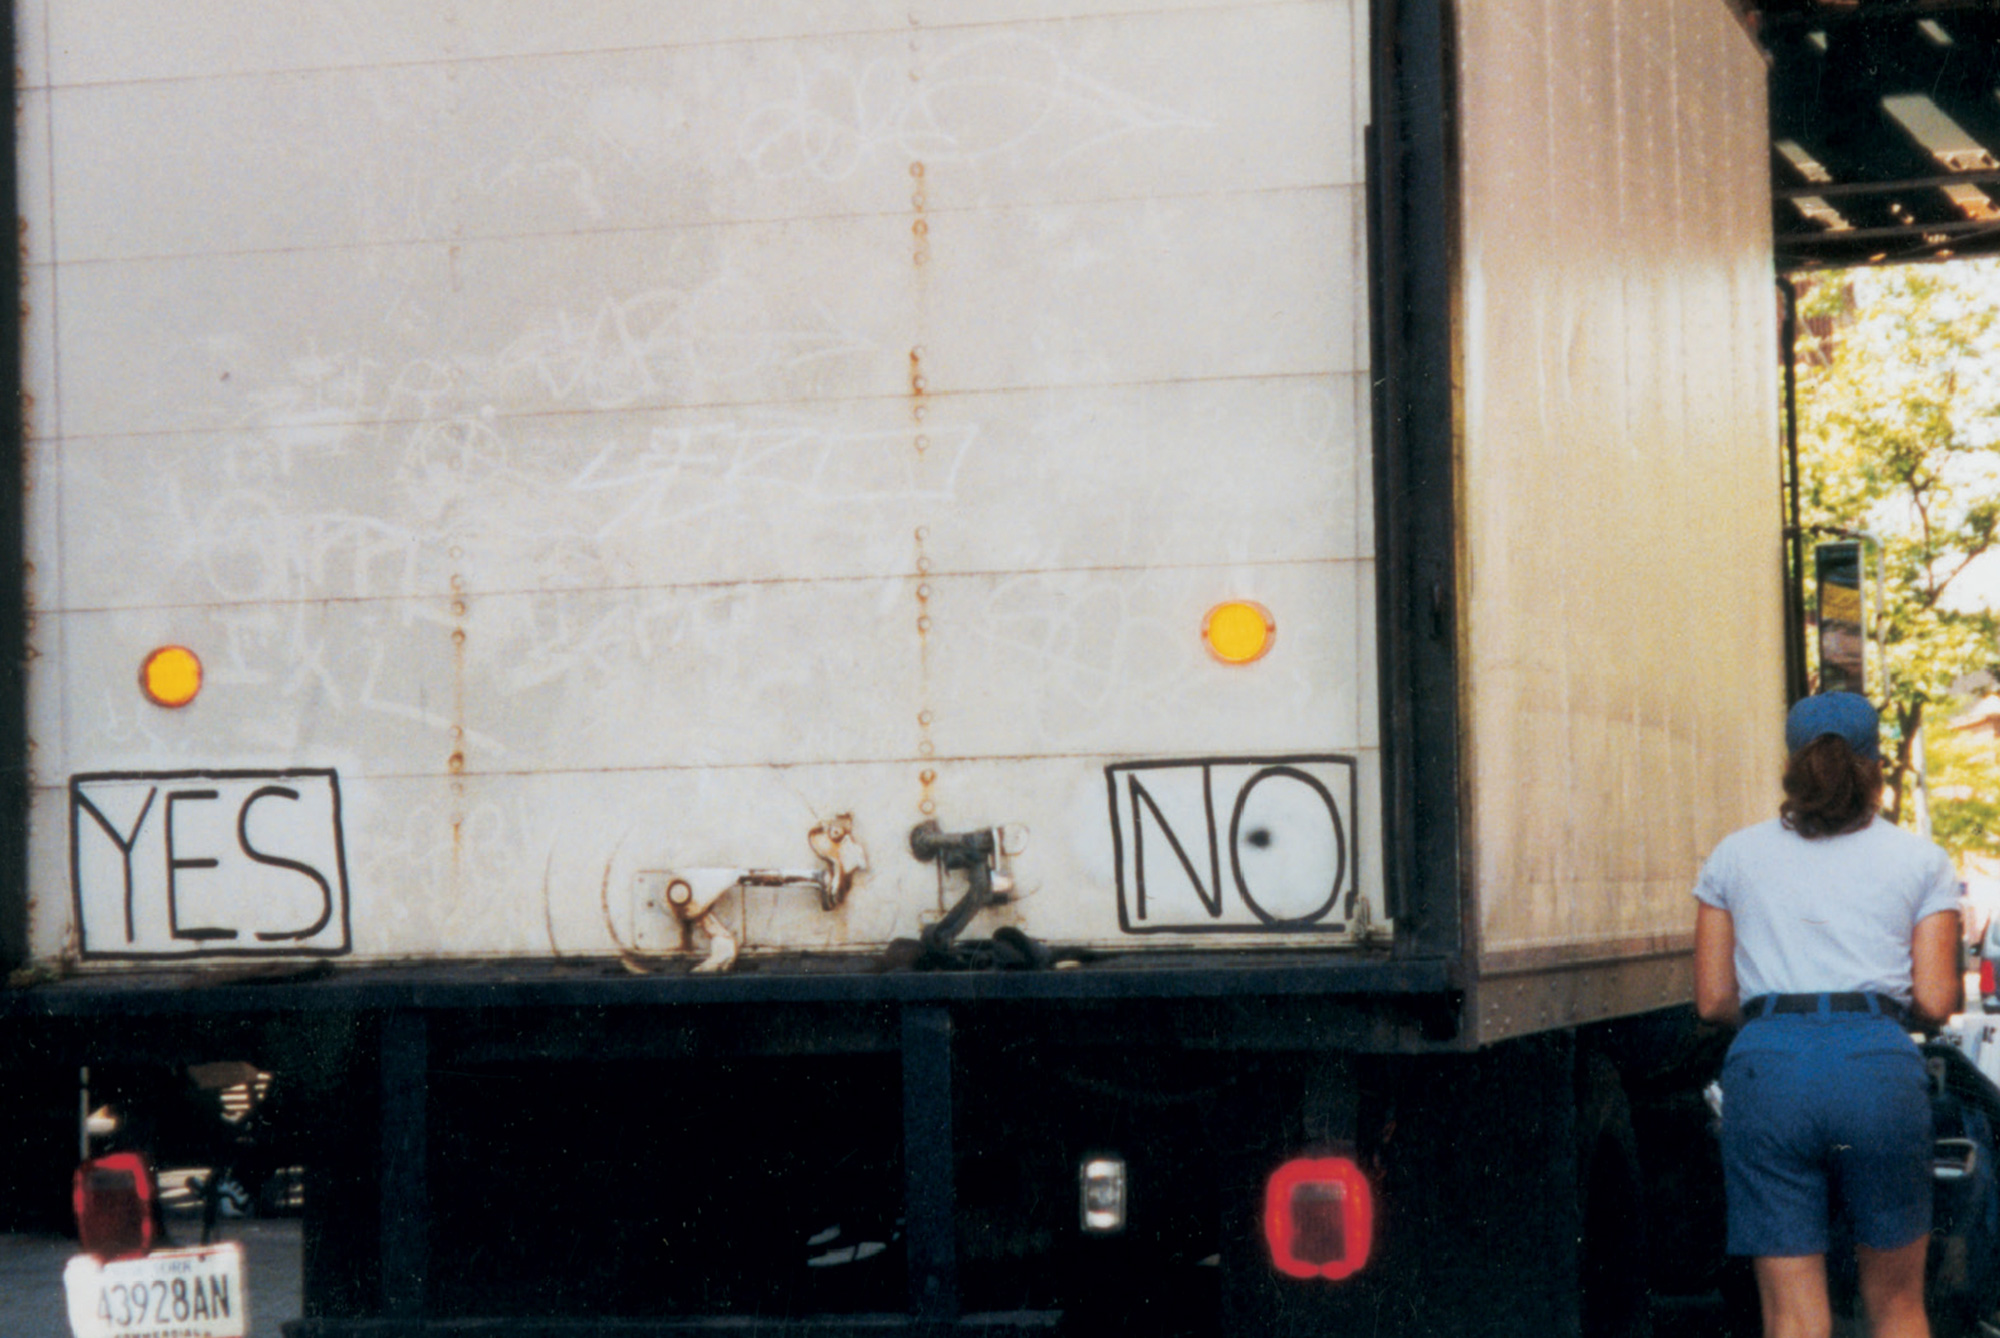 A photo by Joseph Fratesi of the back of a truck with the word 